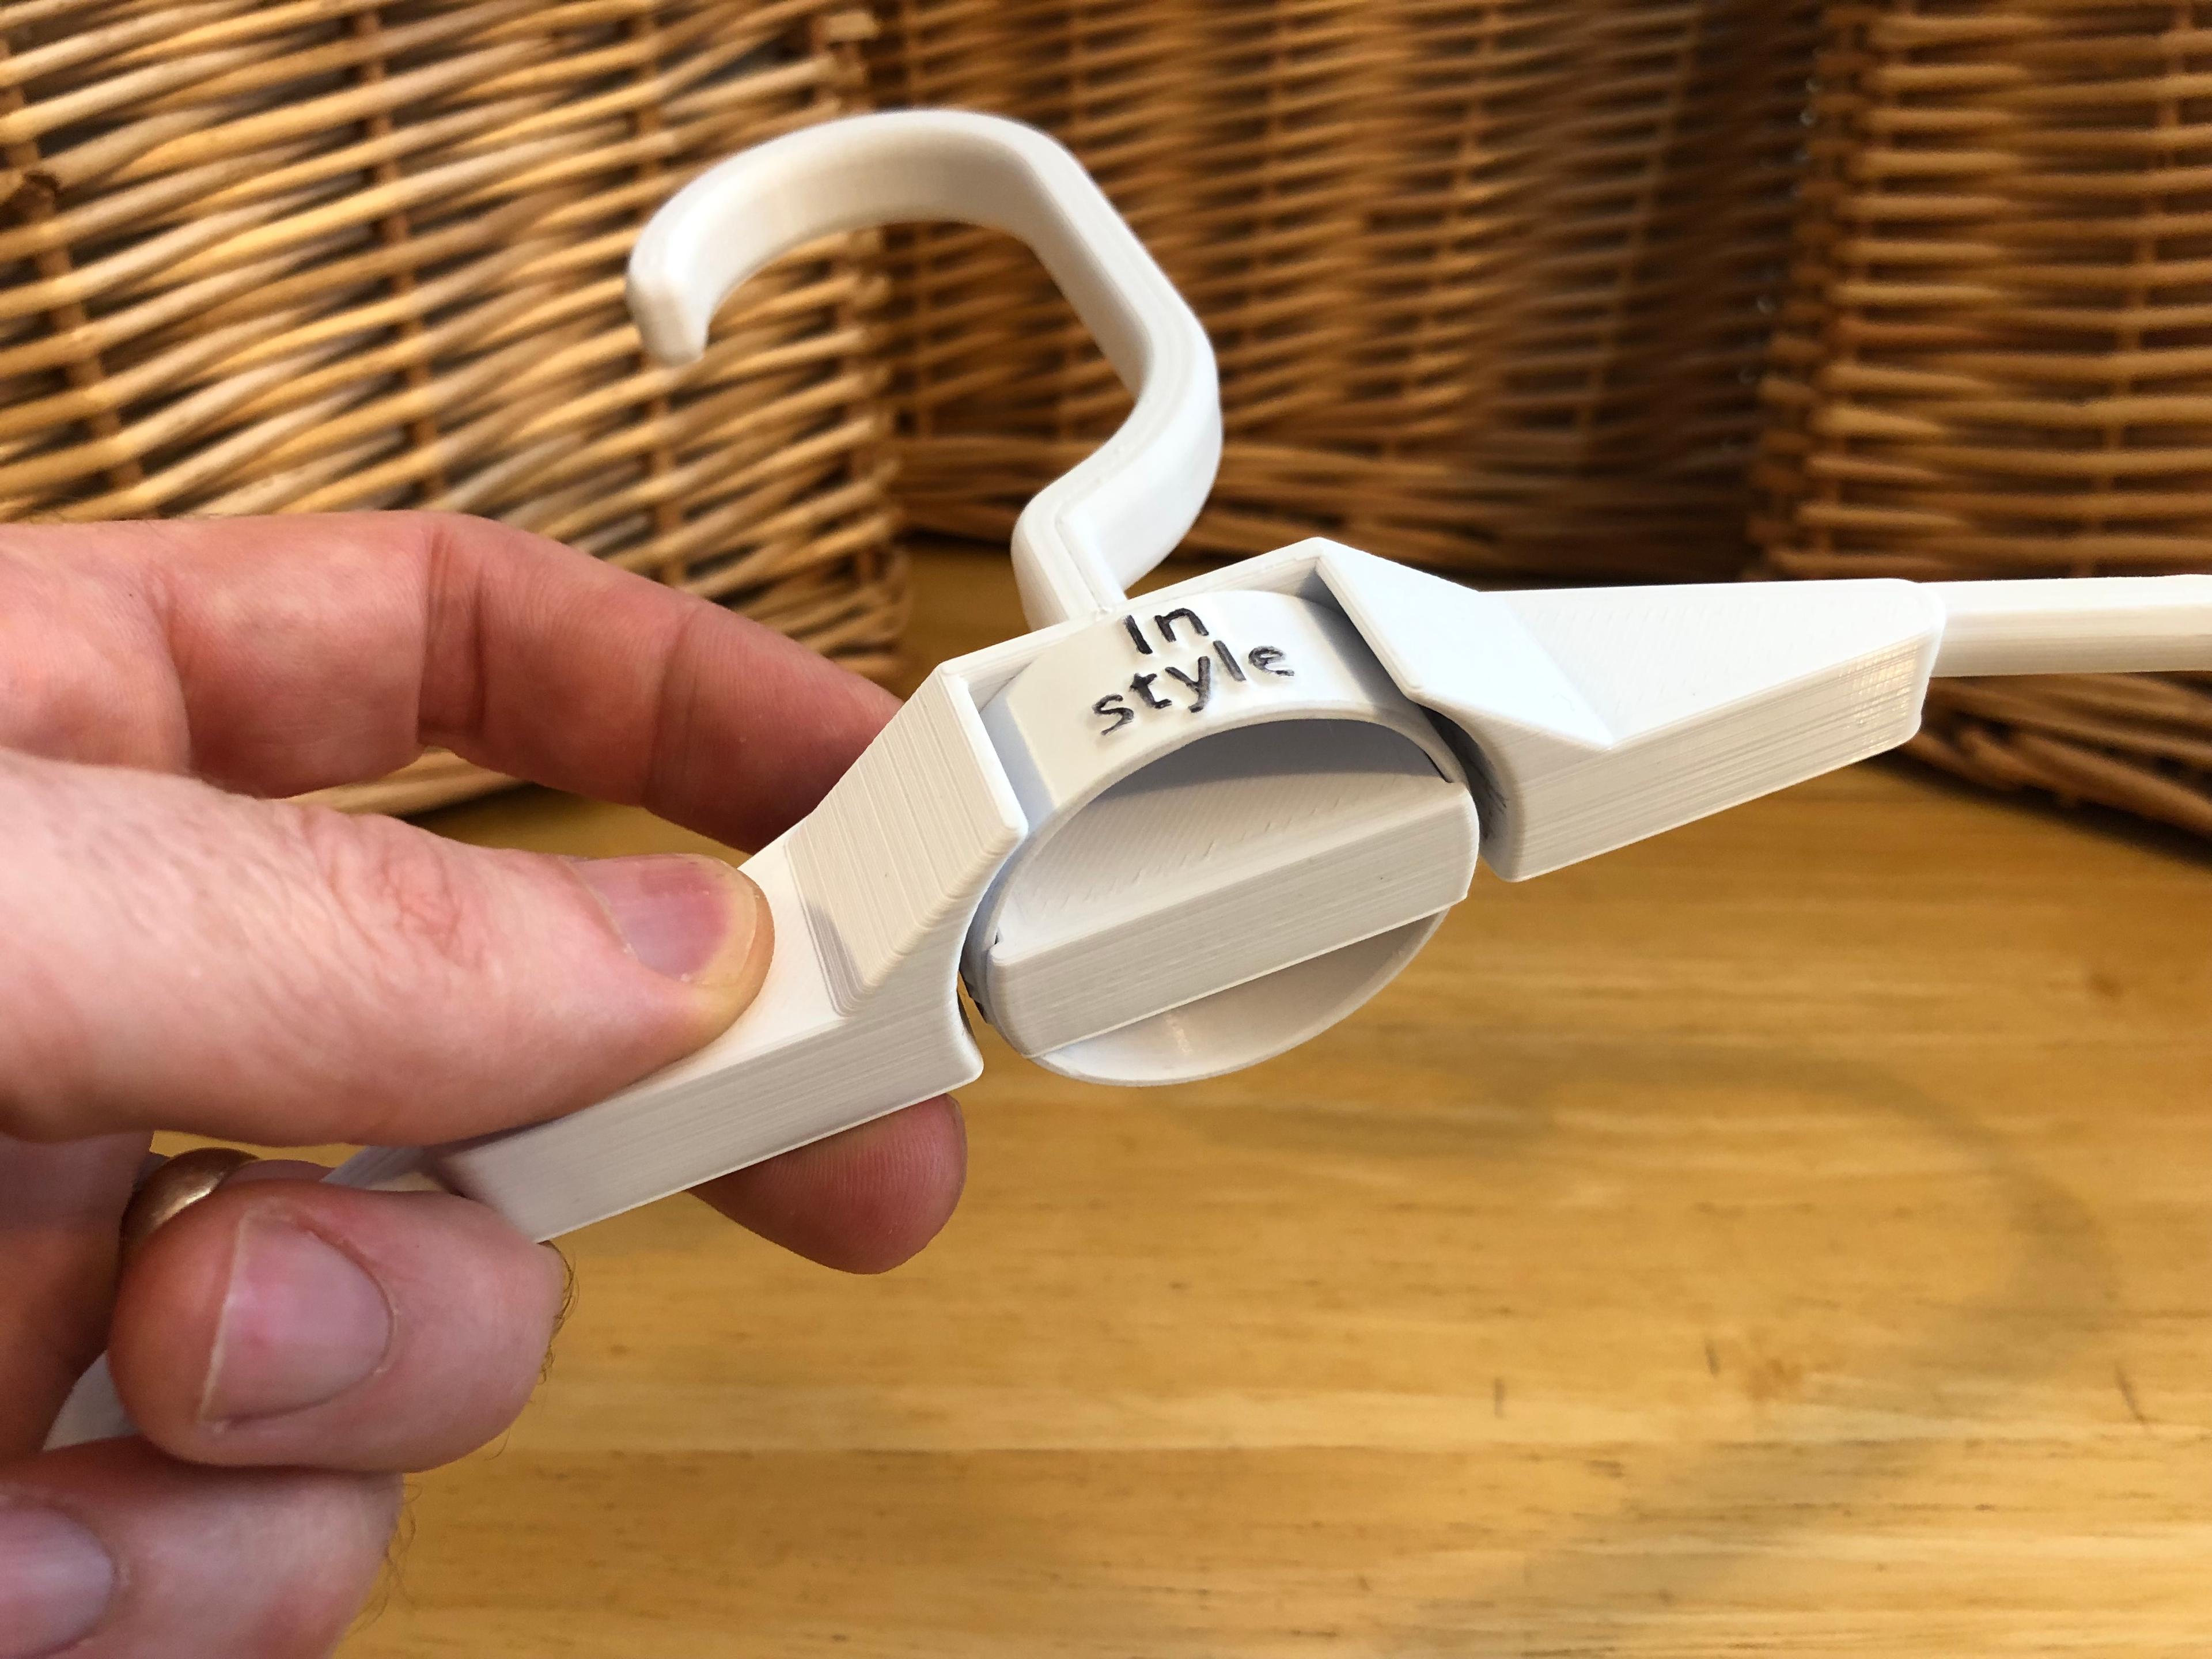 Hanger with Rotating Label 3d model